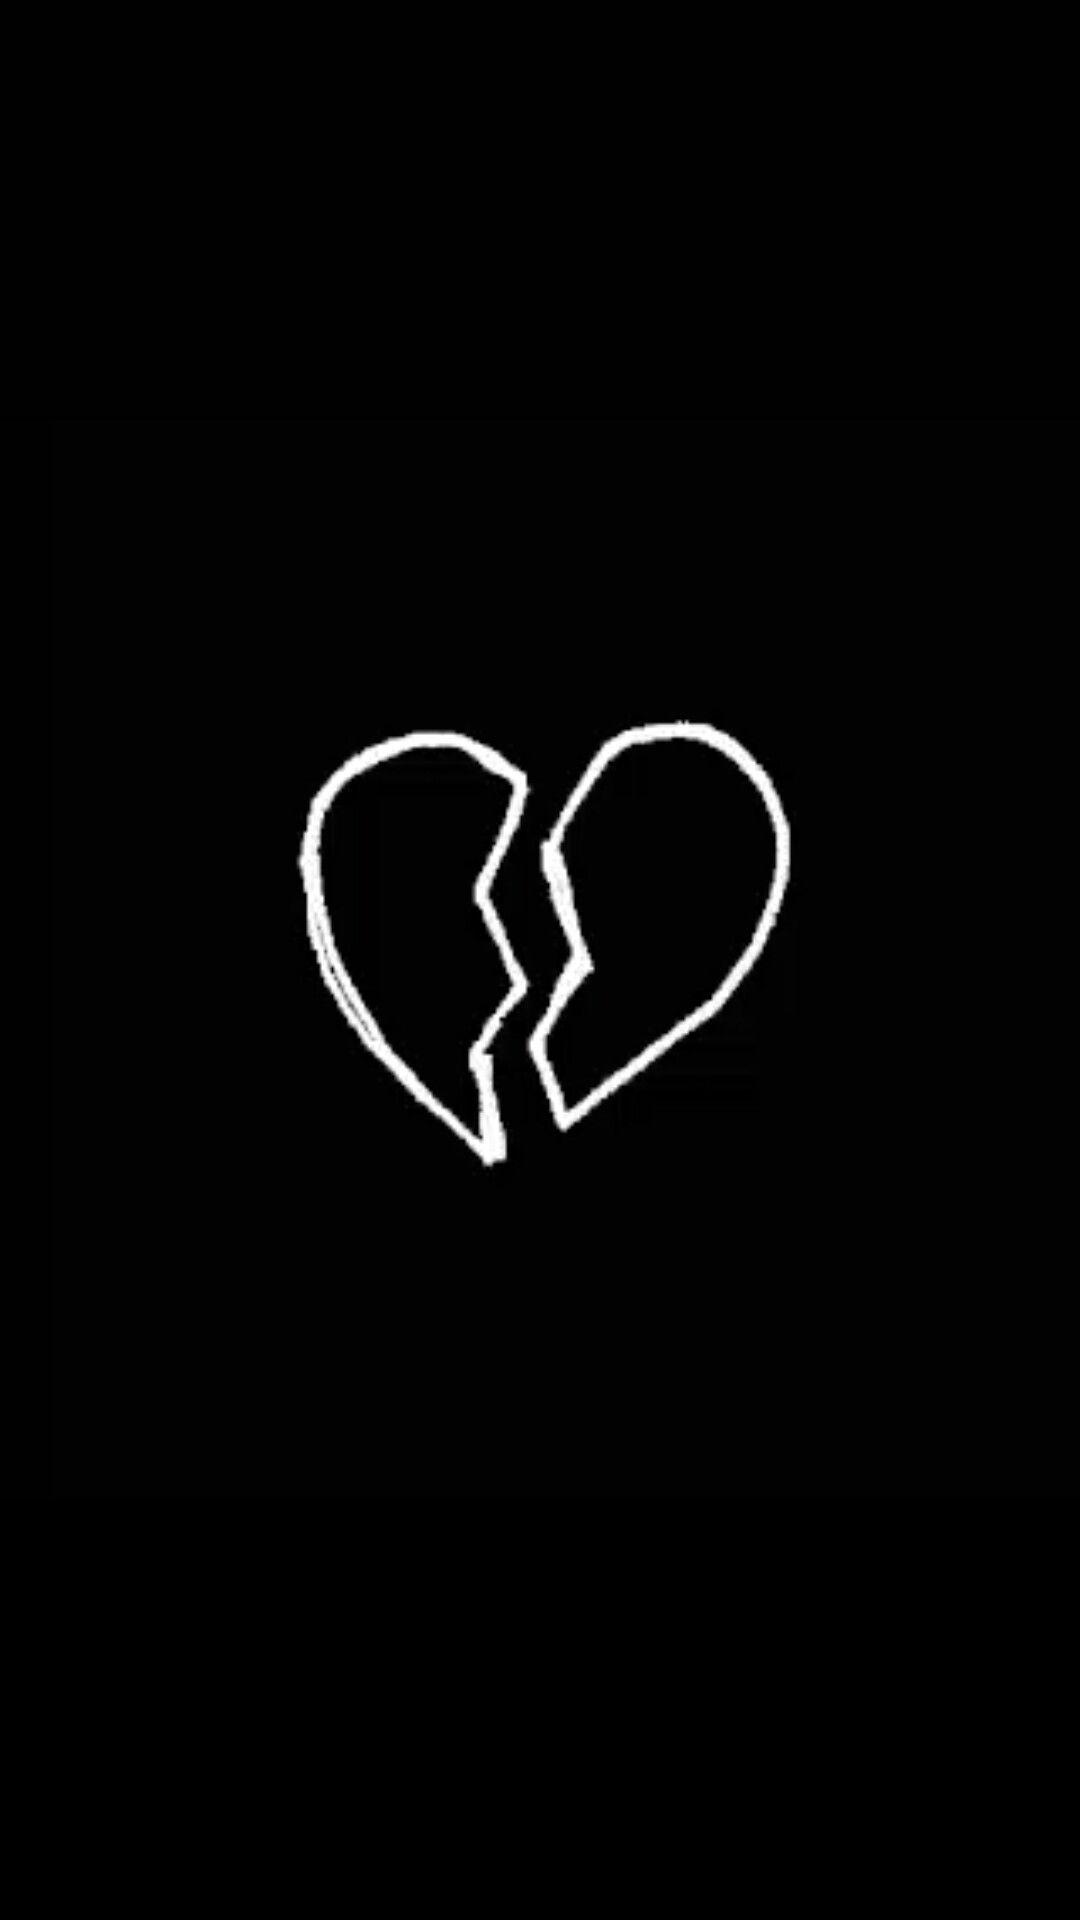 Collection of Heart Broken Wallpaper (image in Collection)